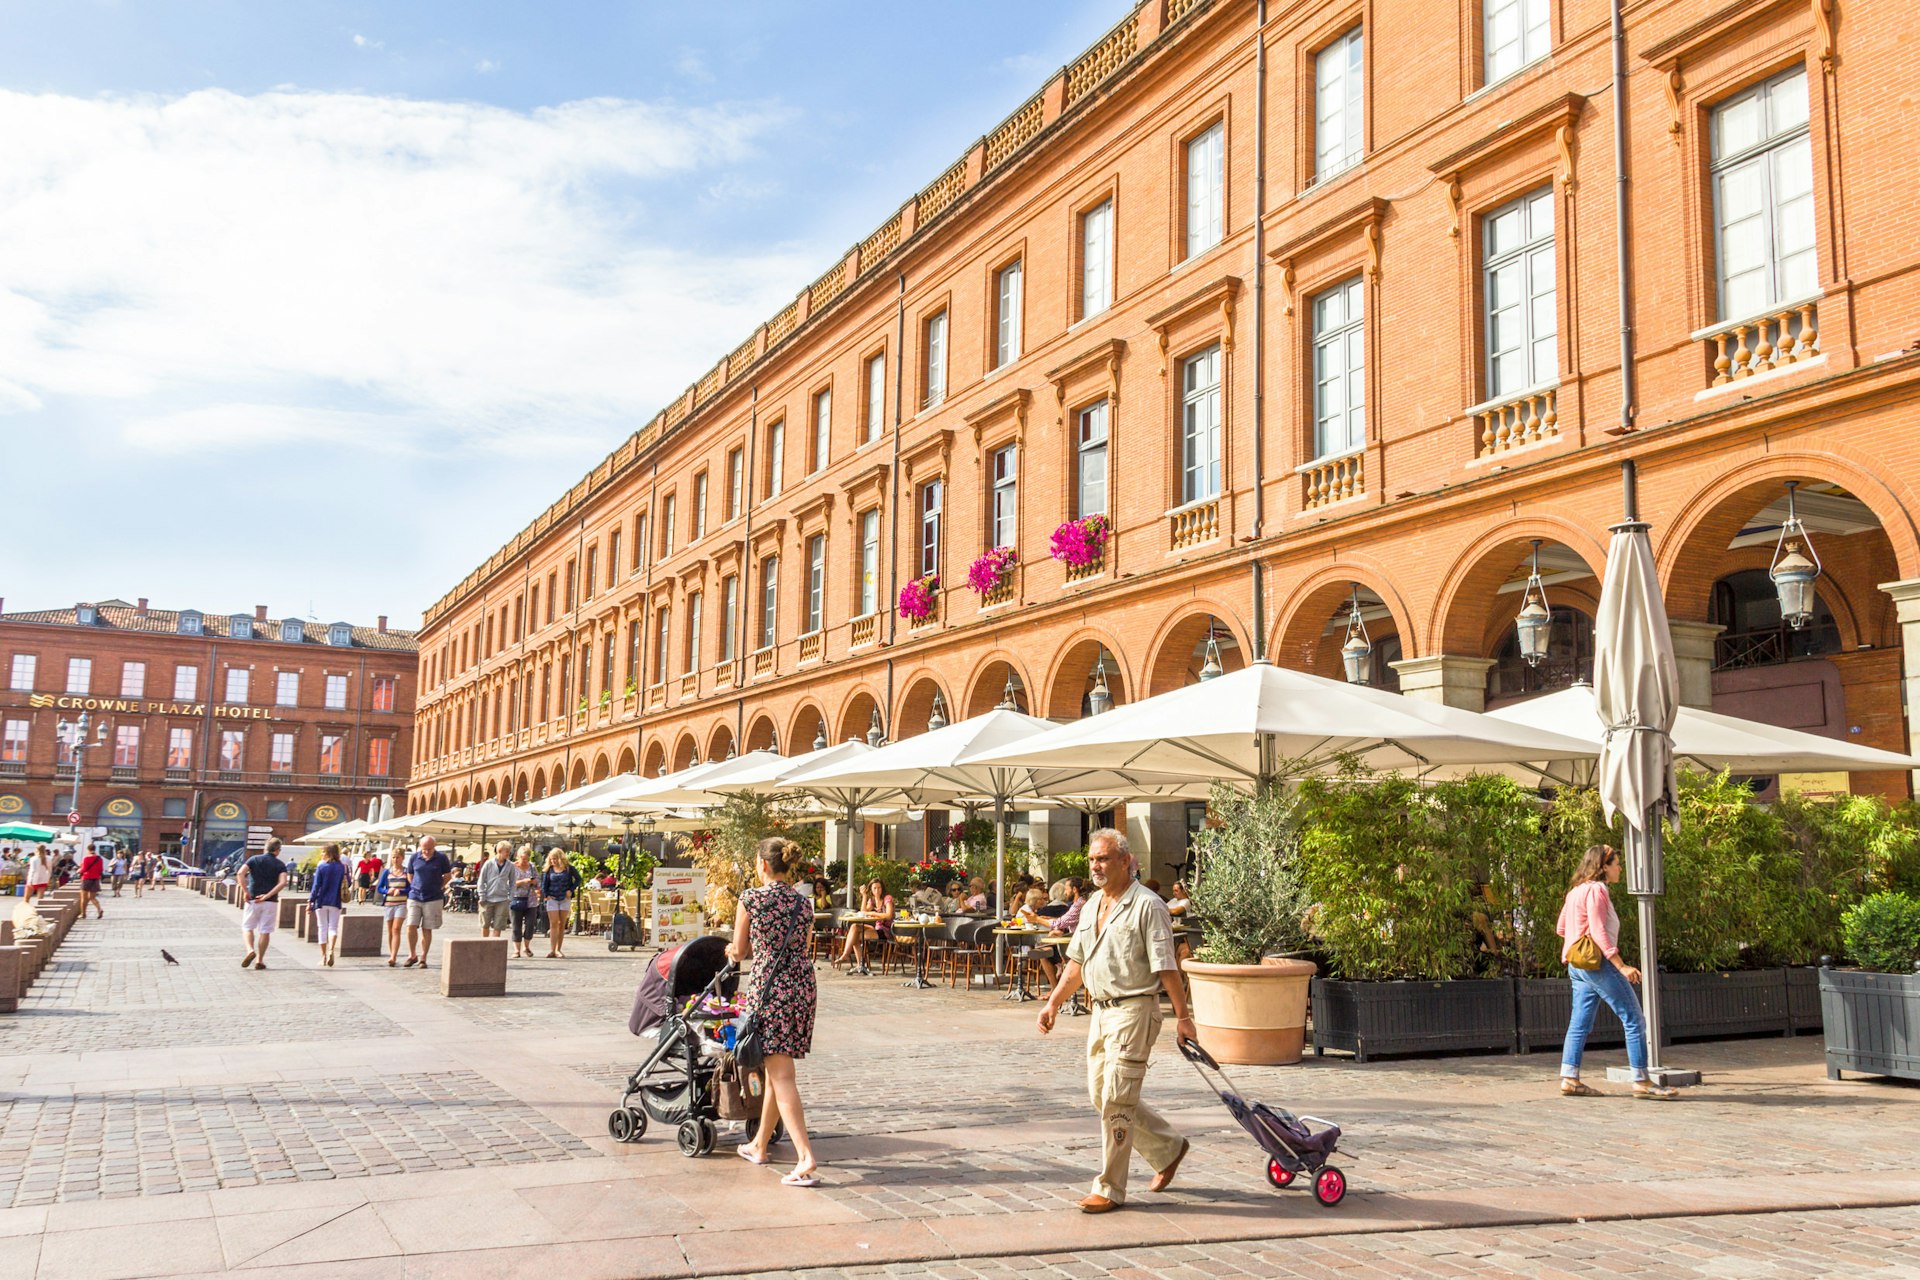 People walking in the Place du Capitole square in Toulouse, France.